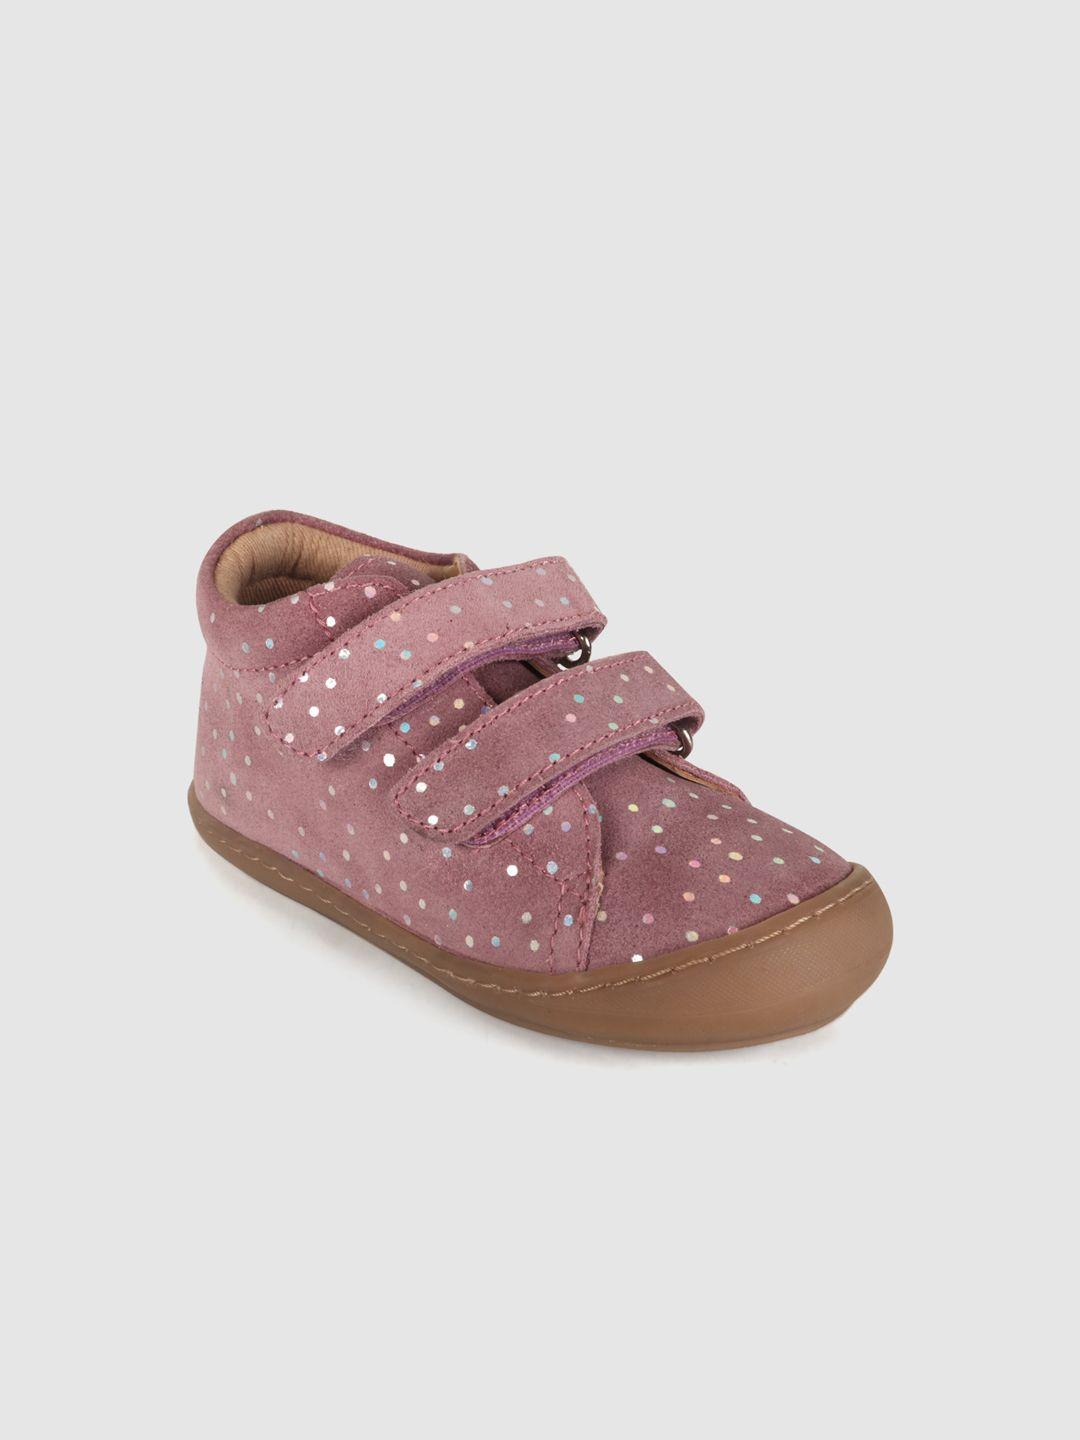 mothercare girls pink & white printed leather first walker booties